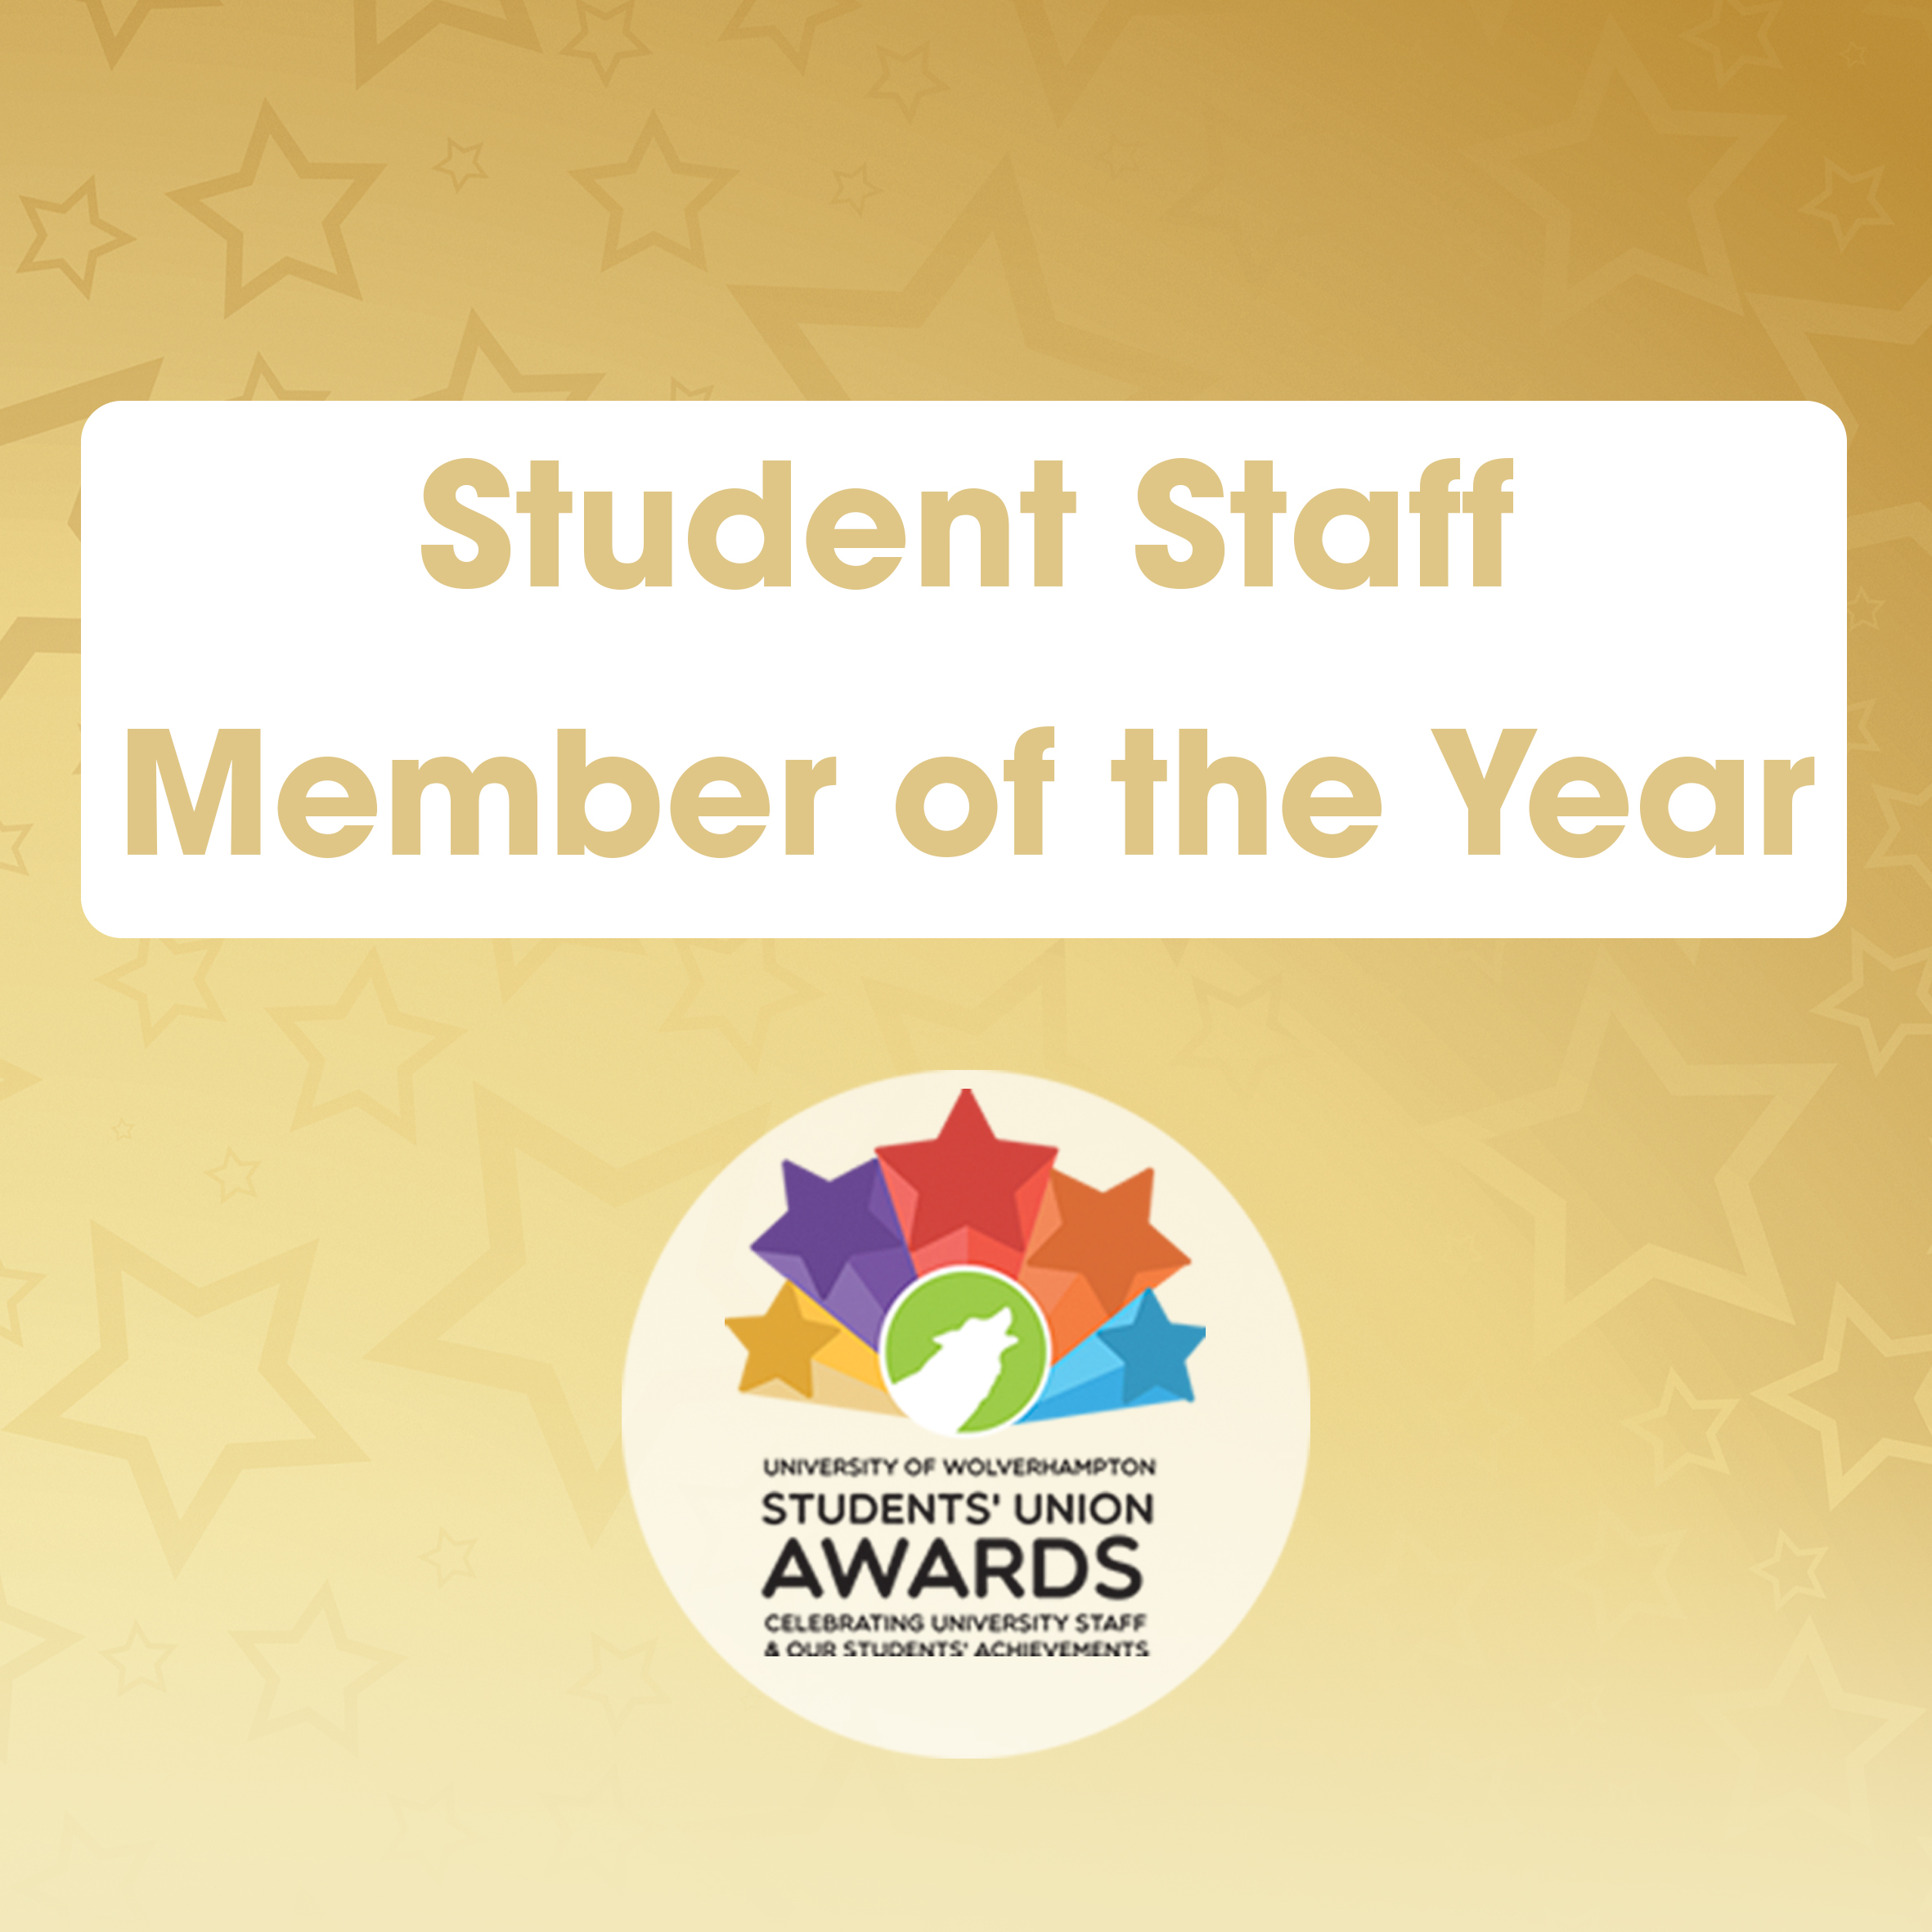 Student Staff Member of the Year